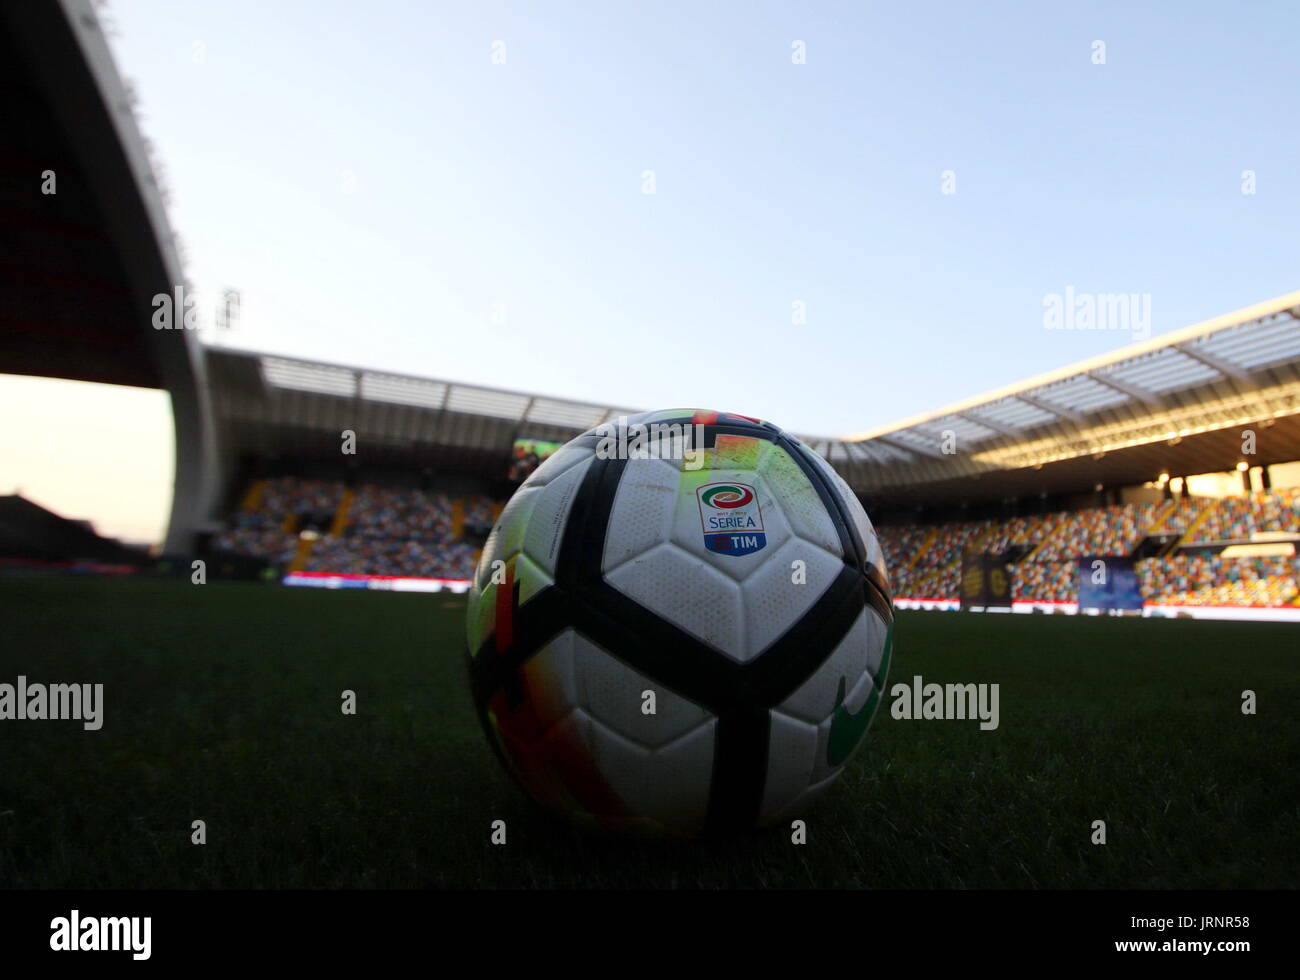 Udine, Italy. 05th Aug, 2017. ITALY, Udine: Official ball of Serie A 2017-18 season during the pre-season friendly football match between Udinese Calcio v AZ Alkmaar at Dacia Arena Stadium on 05th August, 2017. Credit: Andrea Spinelli/Alamy Live News Stock Photo